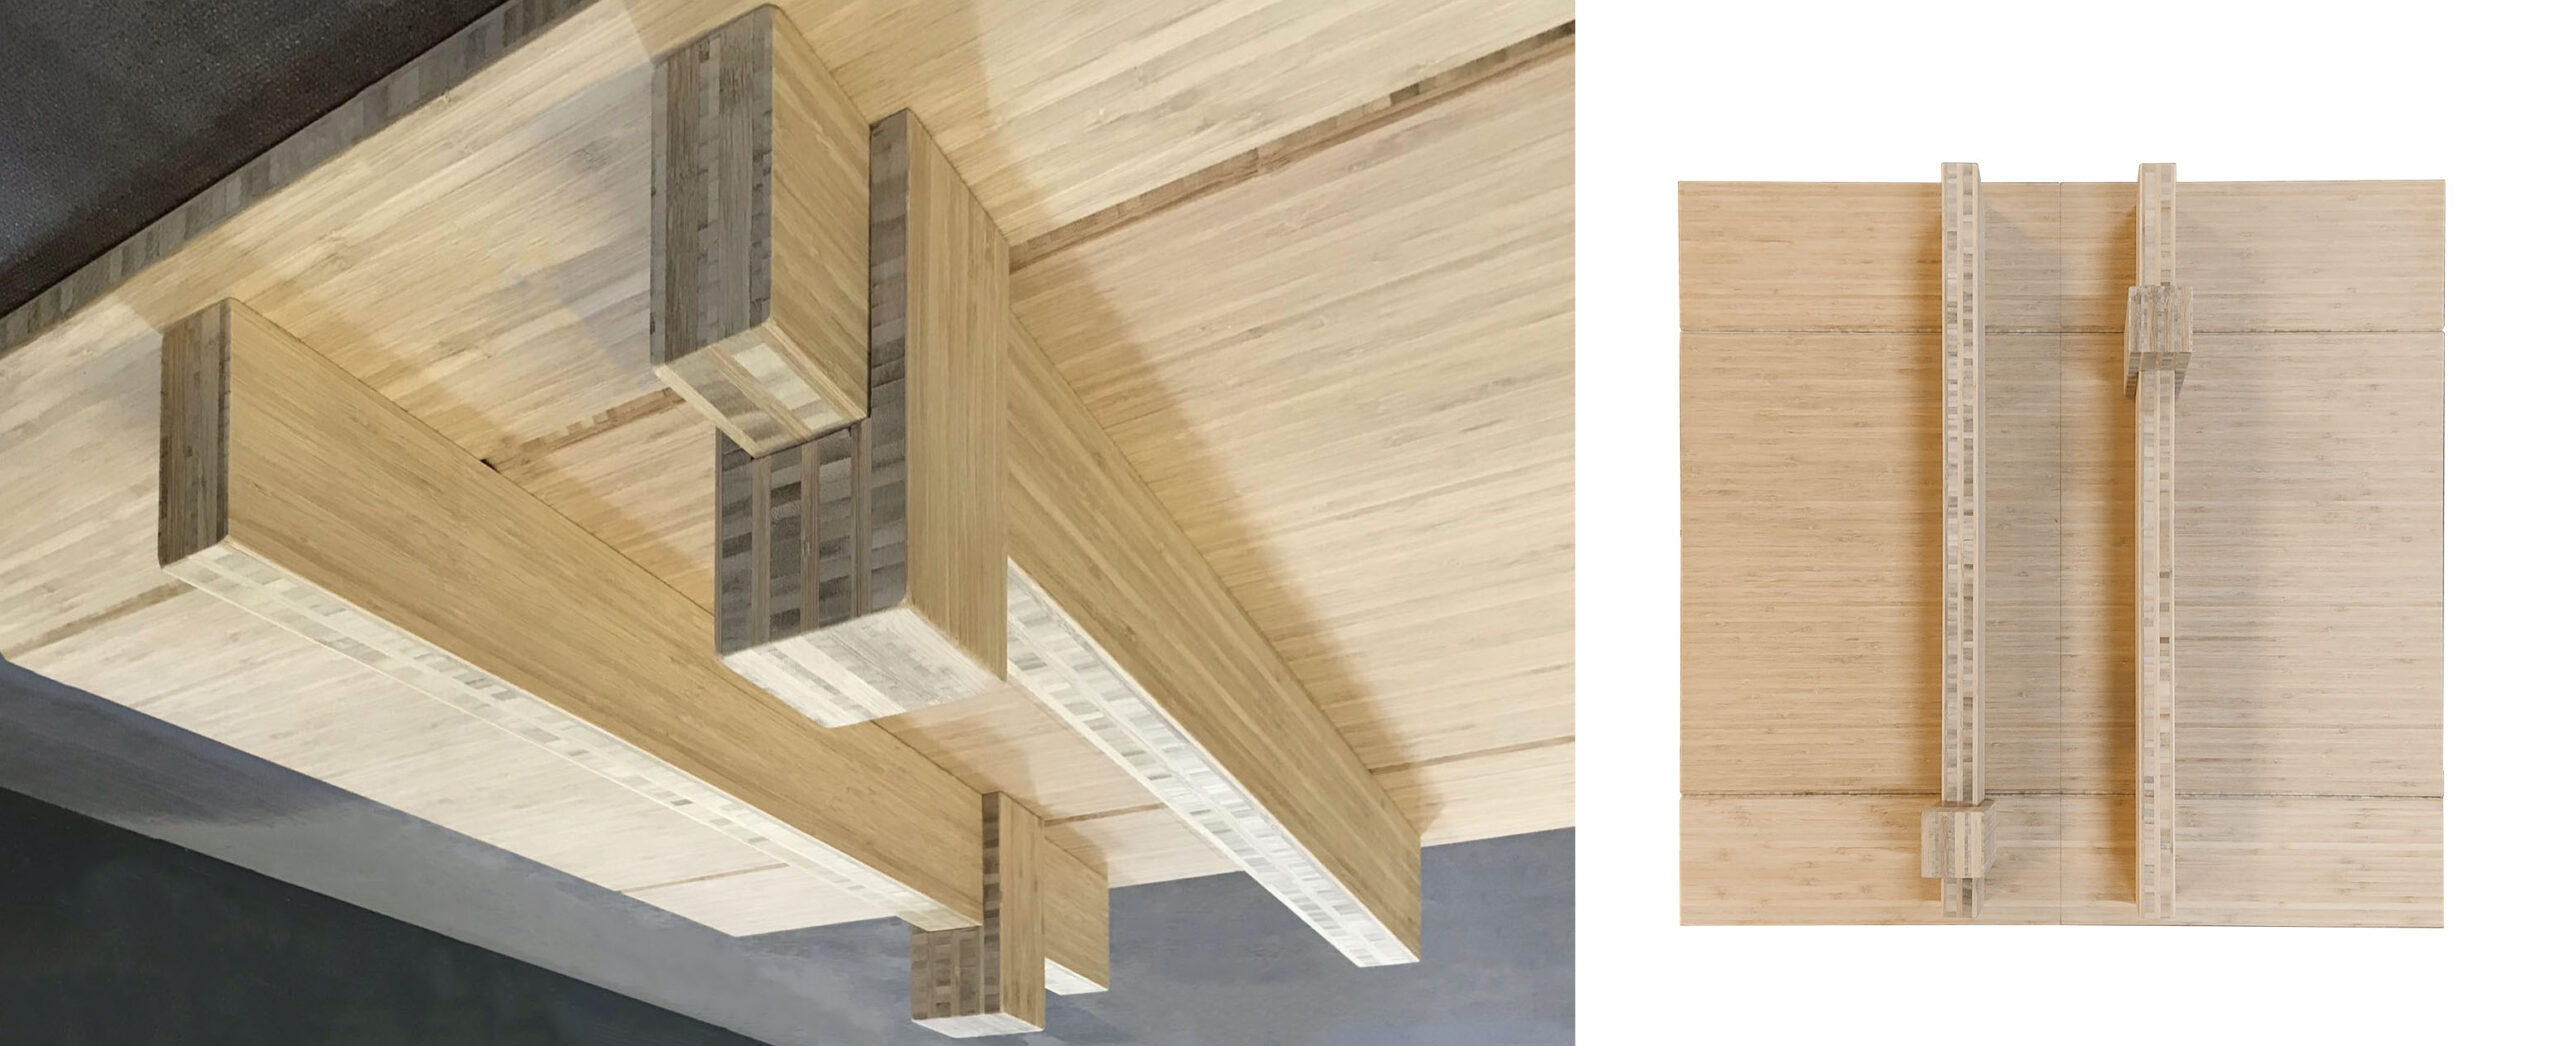 Models and details for the wood ceiling at the Dr. Leïla Mezian Foundation Museum, conceptual work by Kengo Kuma.